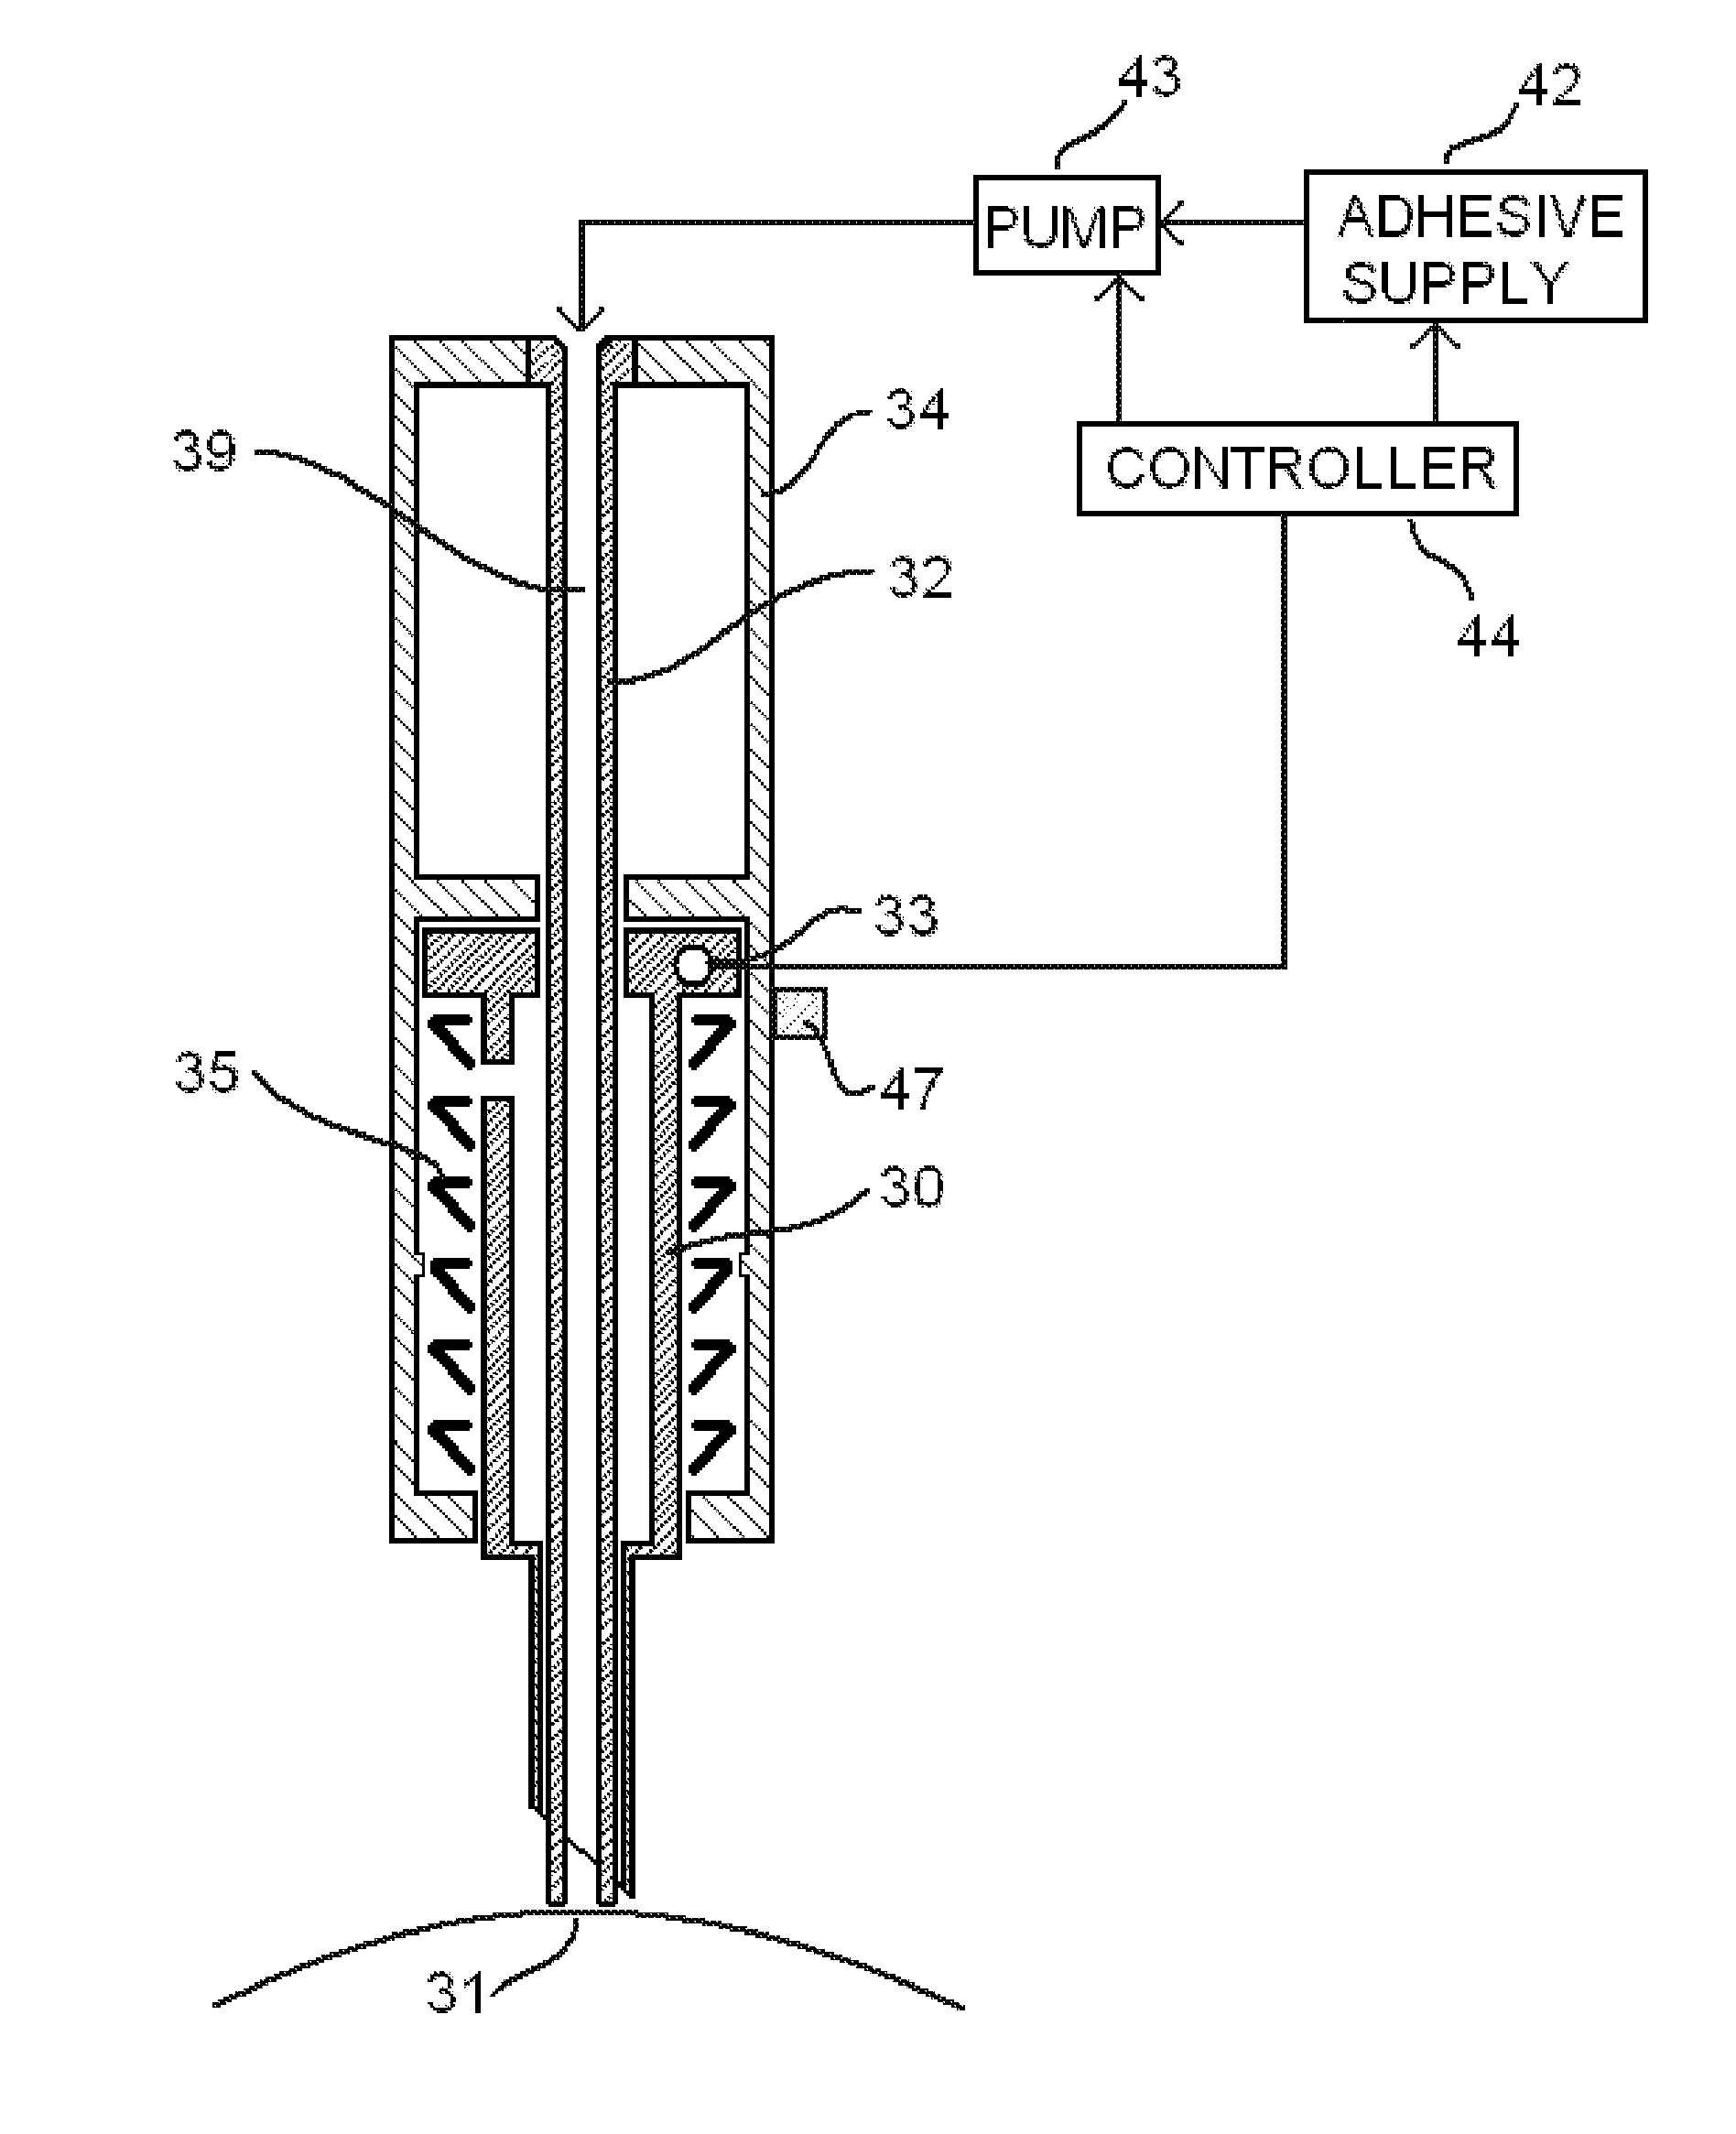 Hair implant apparatus and method for its use